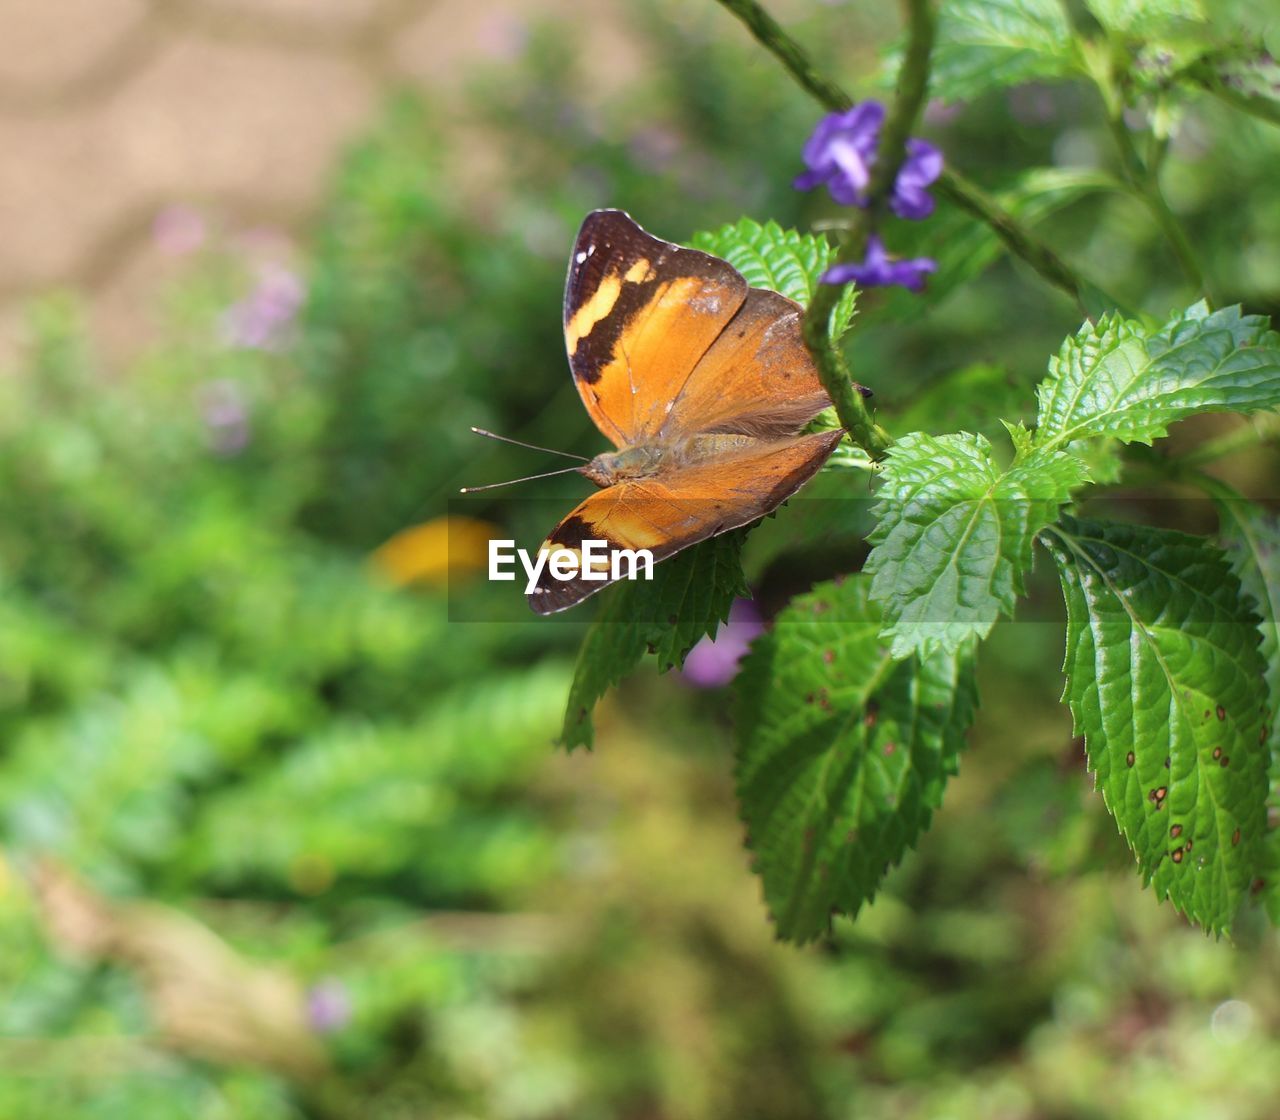 CLOSE-UP OF BUTTERFLY ON PLANT OUTDOORS